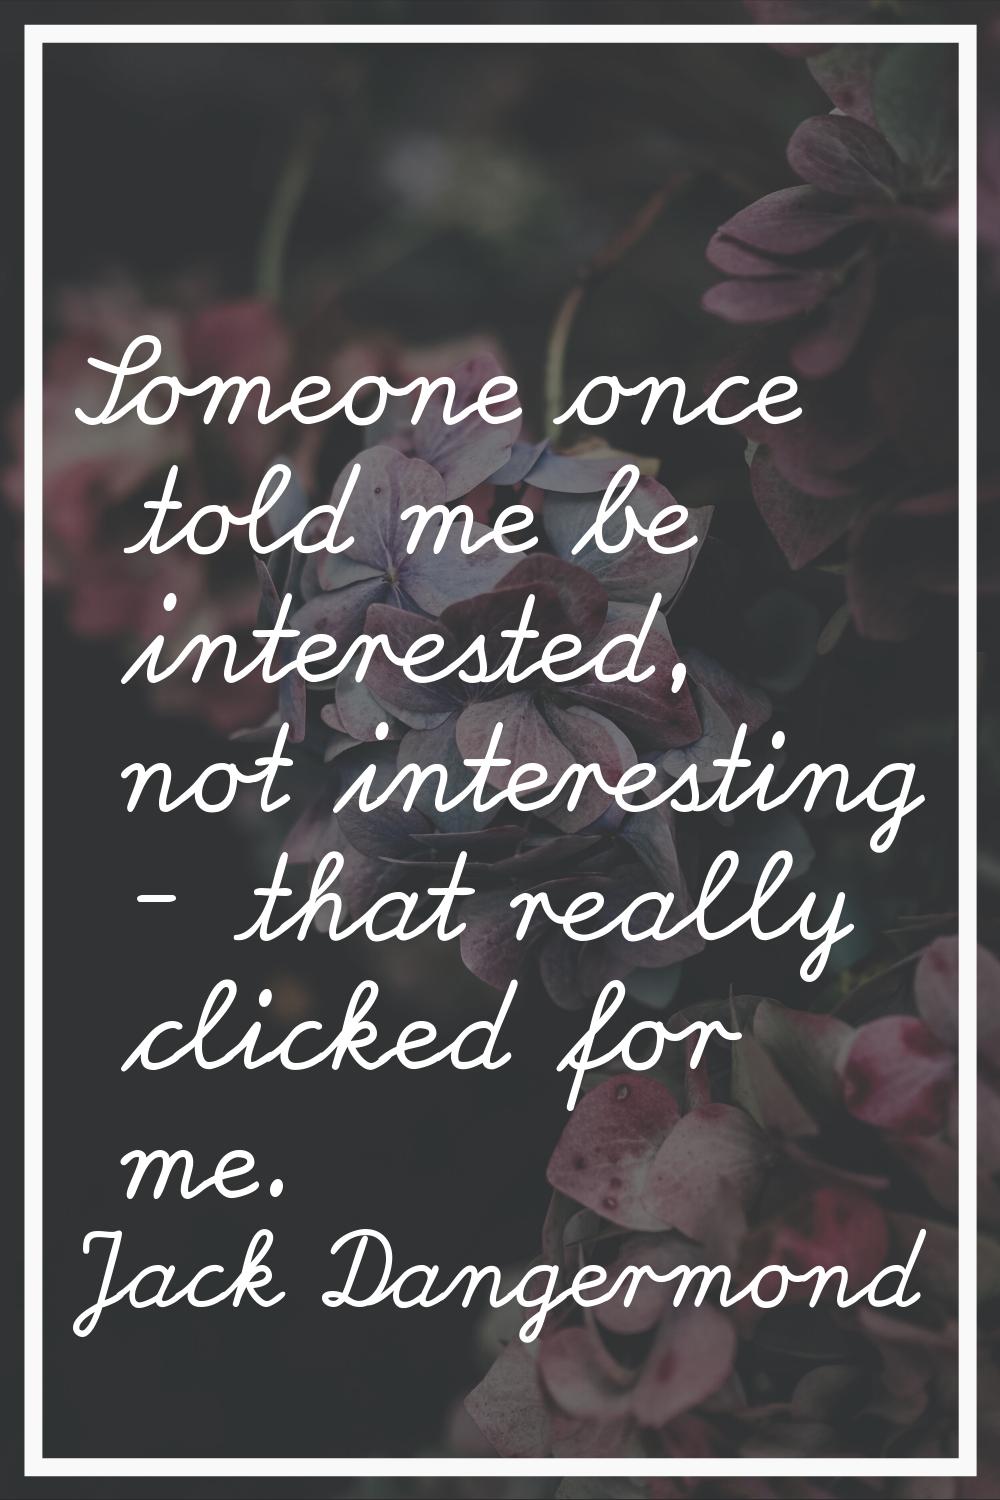 Someone once told me be interested, not interesting - that really clicked for me.